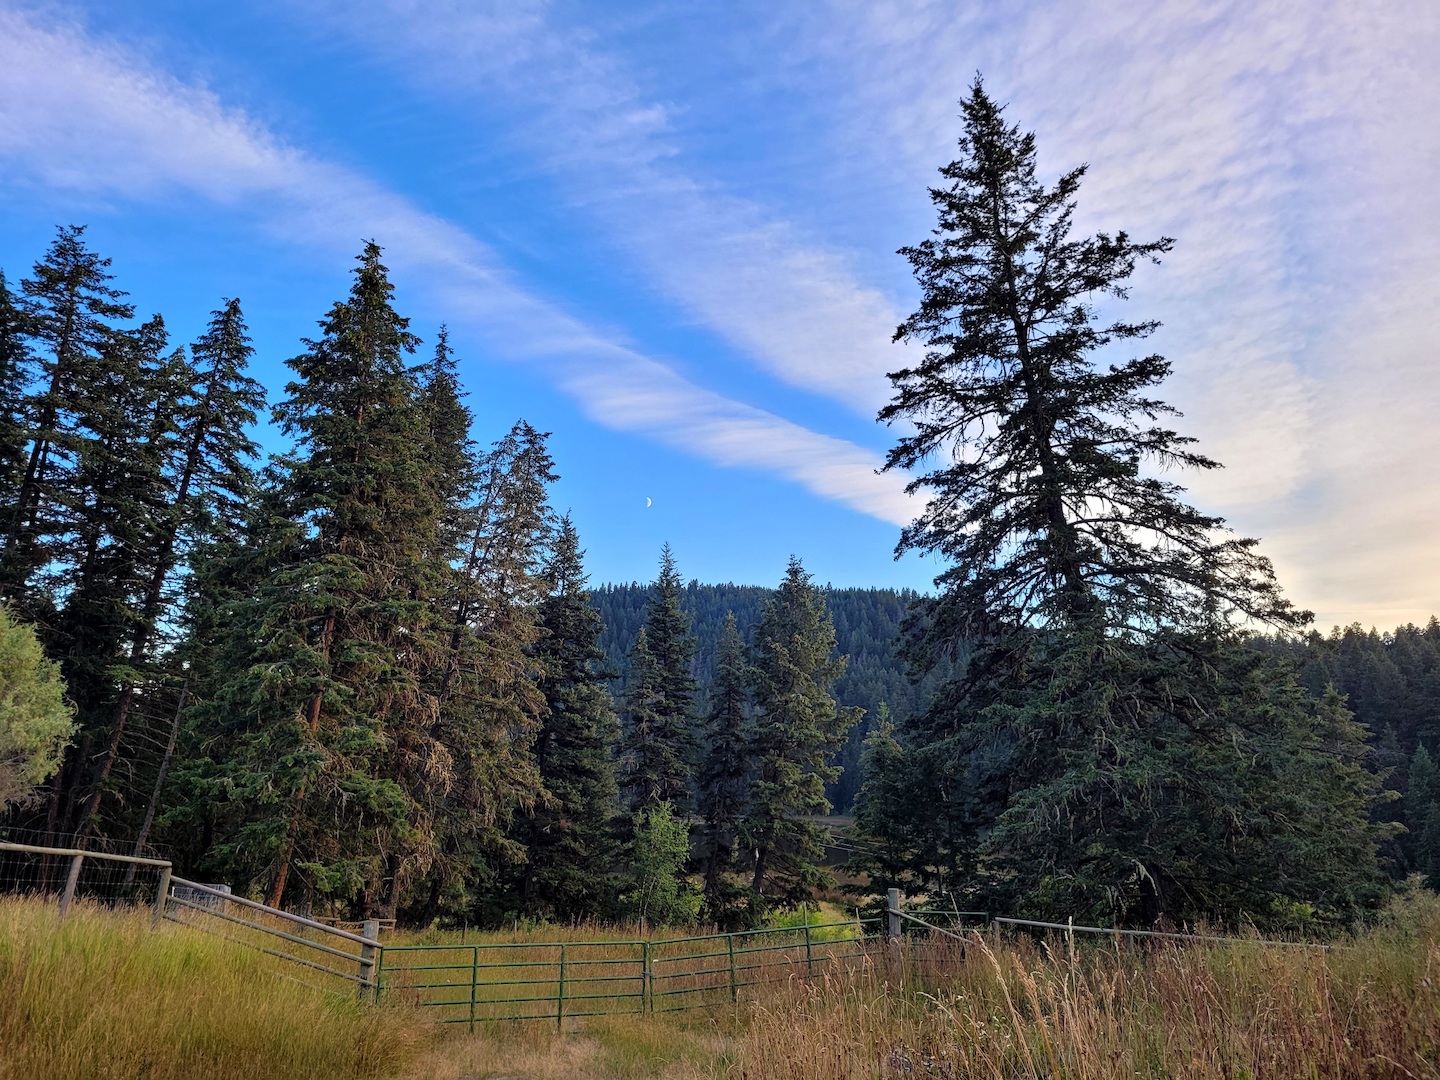 photo of a cloud-streaked blue sky over tall trees and a green metal ranch gate